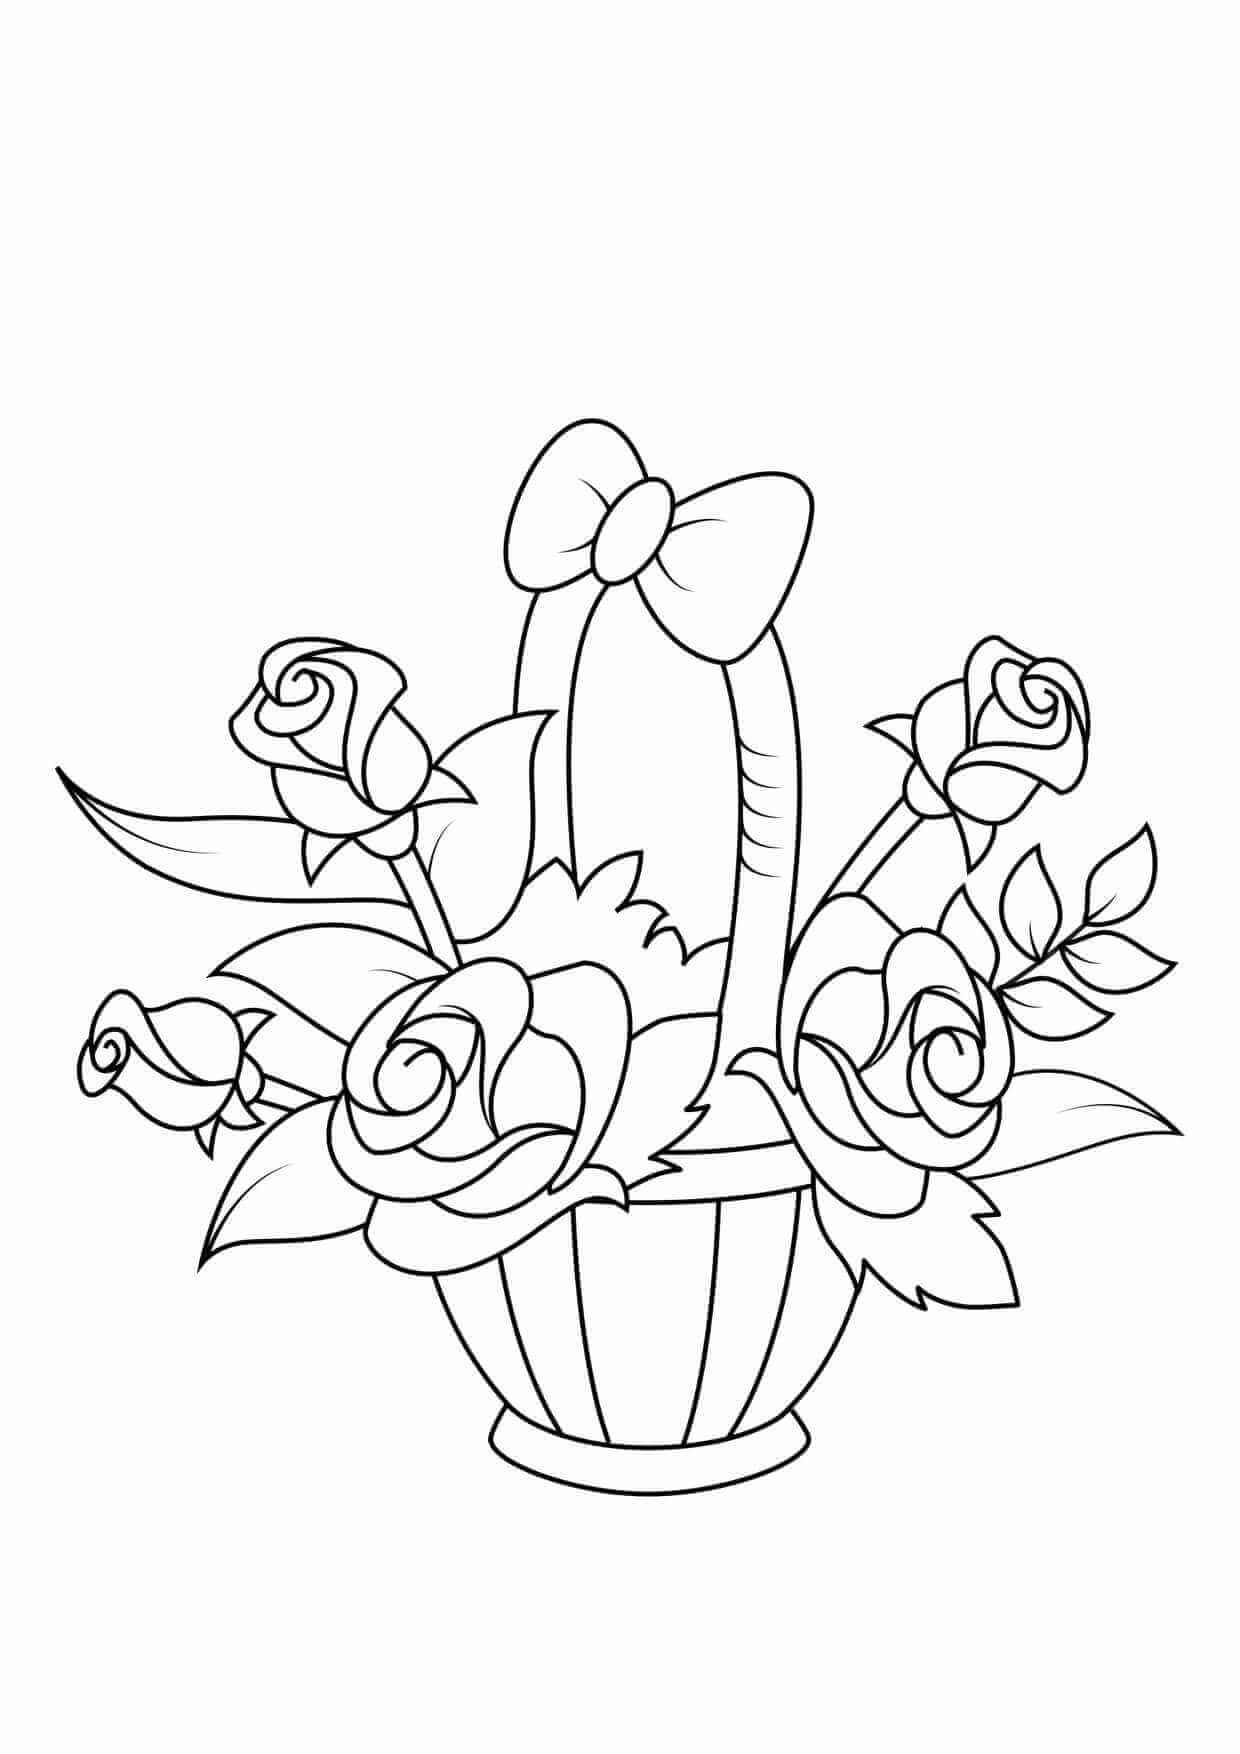 Coloring Pages For Girls Best Coloring Pages For Kids Coloring Pages 